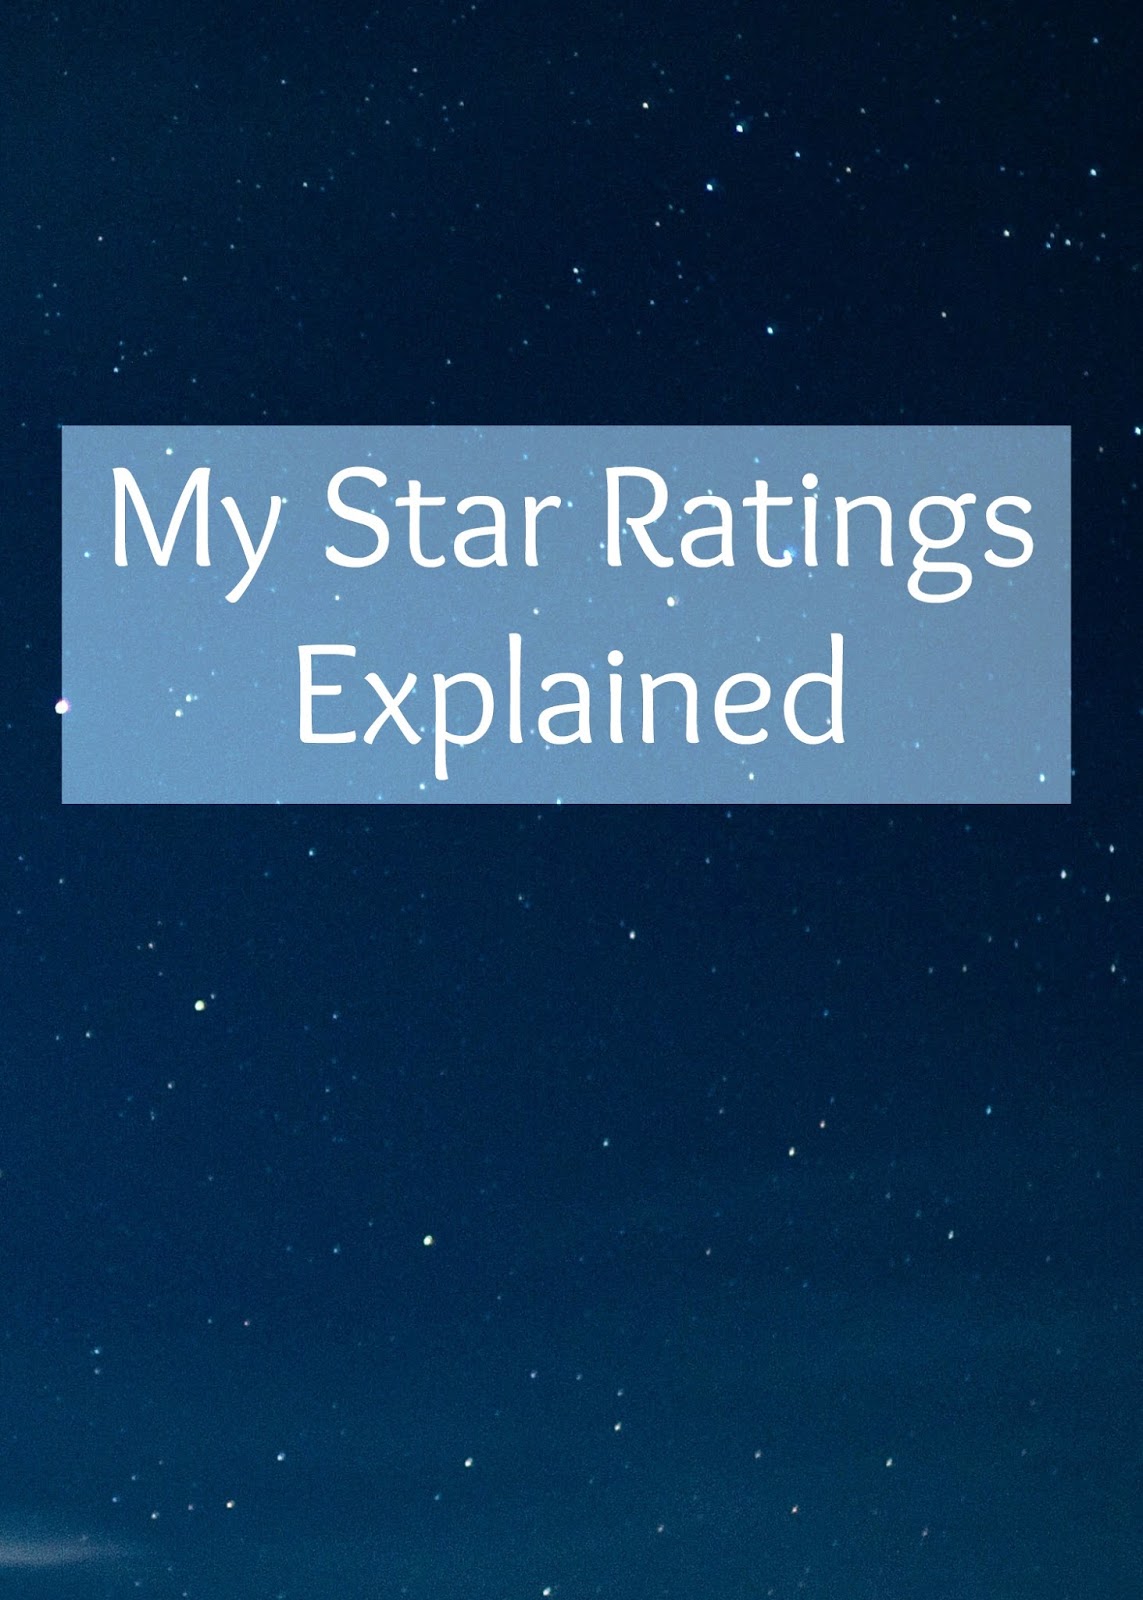 My Star Ratings Explained